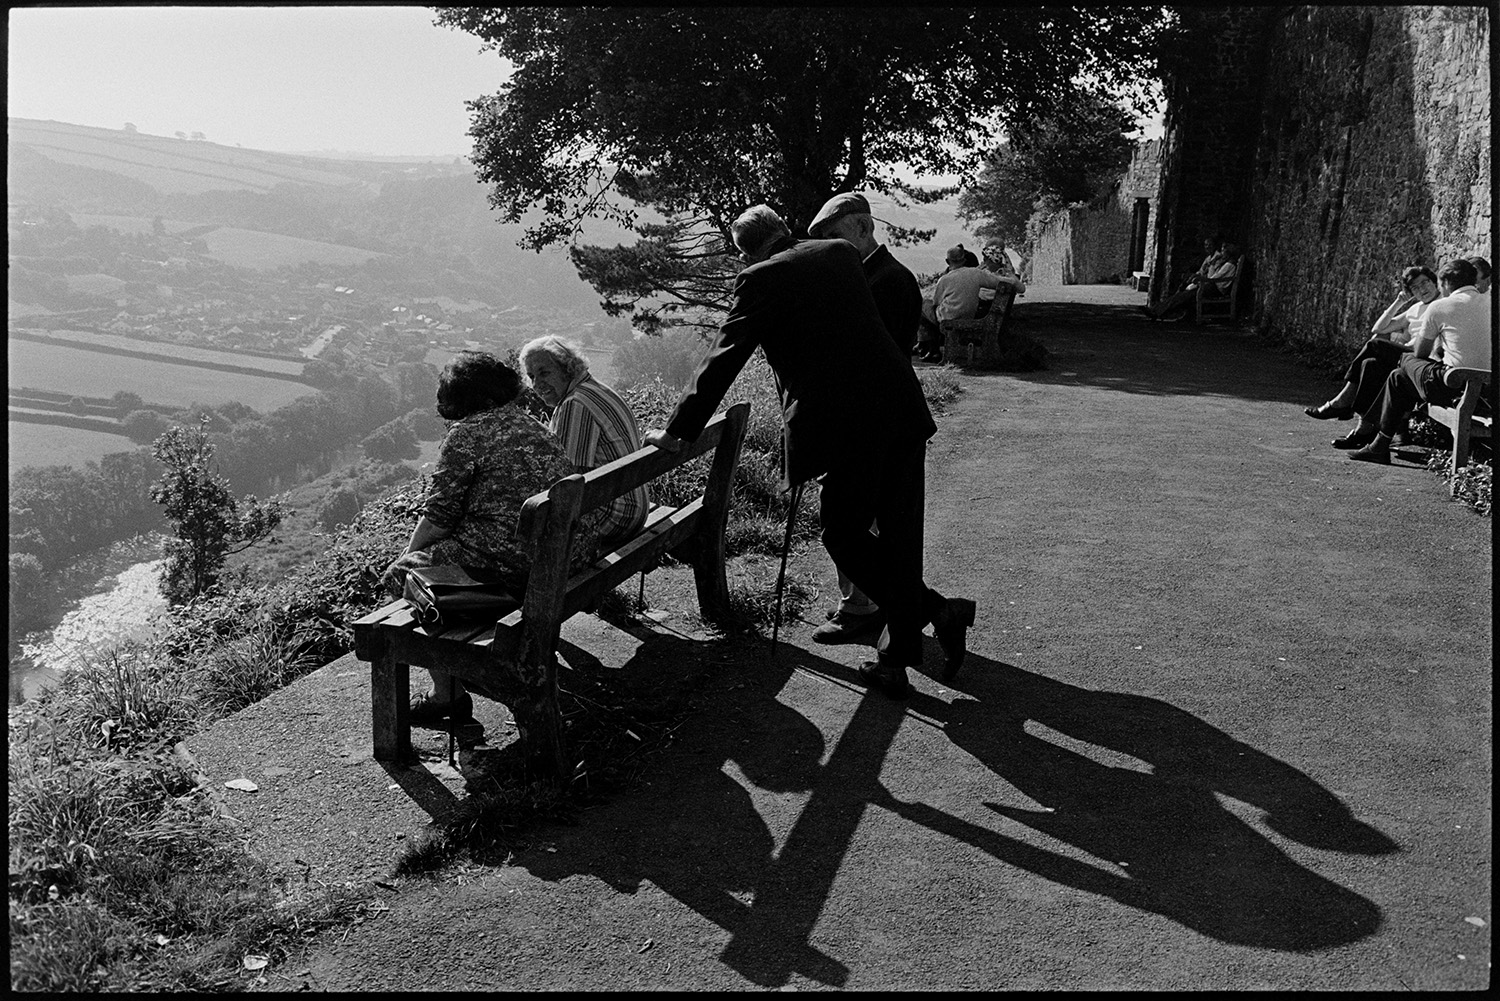 People and children enjoying park and fine view, bicycles. 
[People sat on benches along a path in a park at Torrington, looking out over a valley with fields, trees and the River Torridge. The town of Torrington can be seen in the distance.]